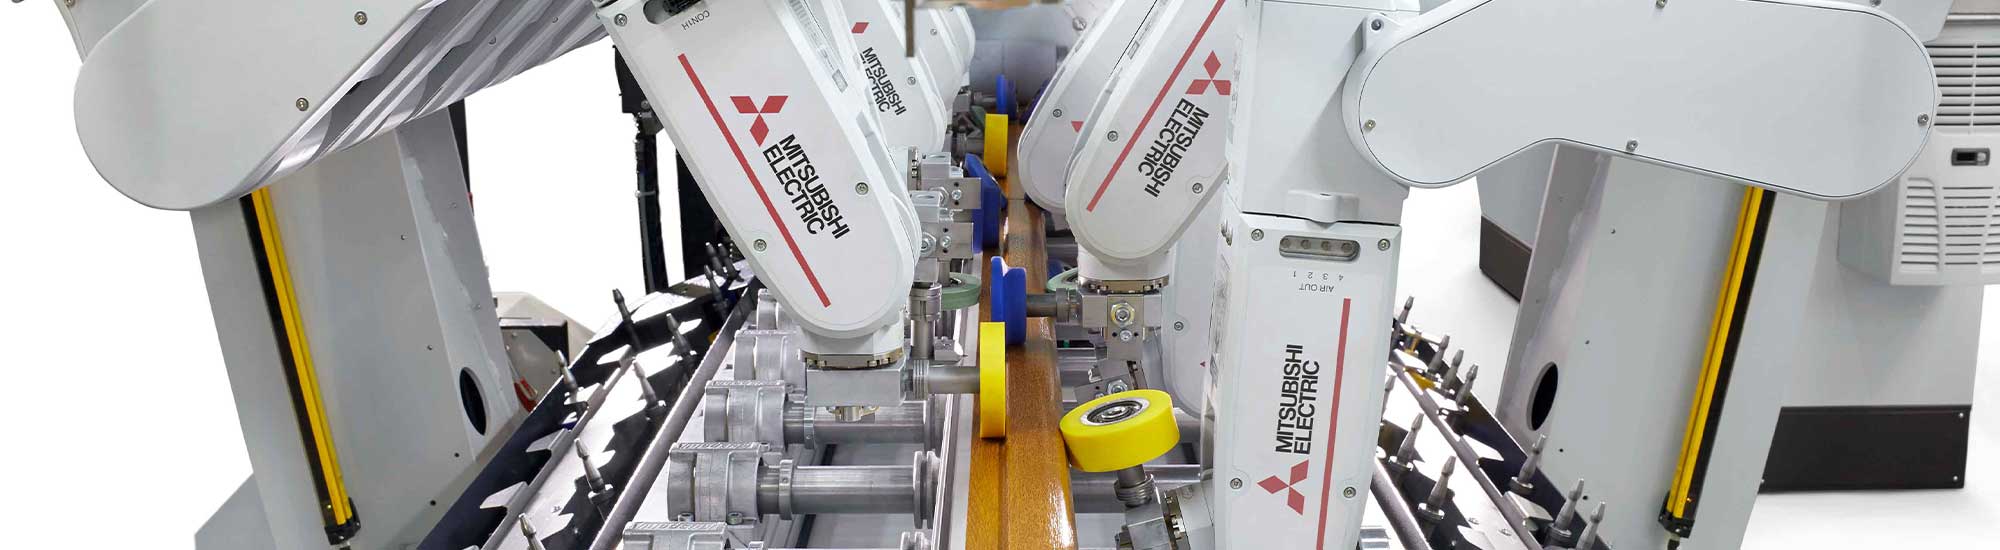  RoboWrap - the world's first fully automated and intelligent profile wrapping system.